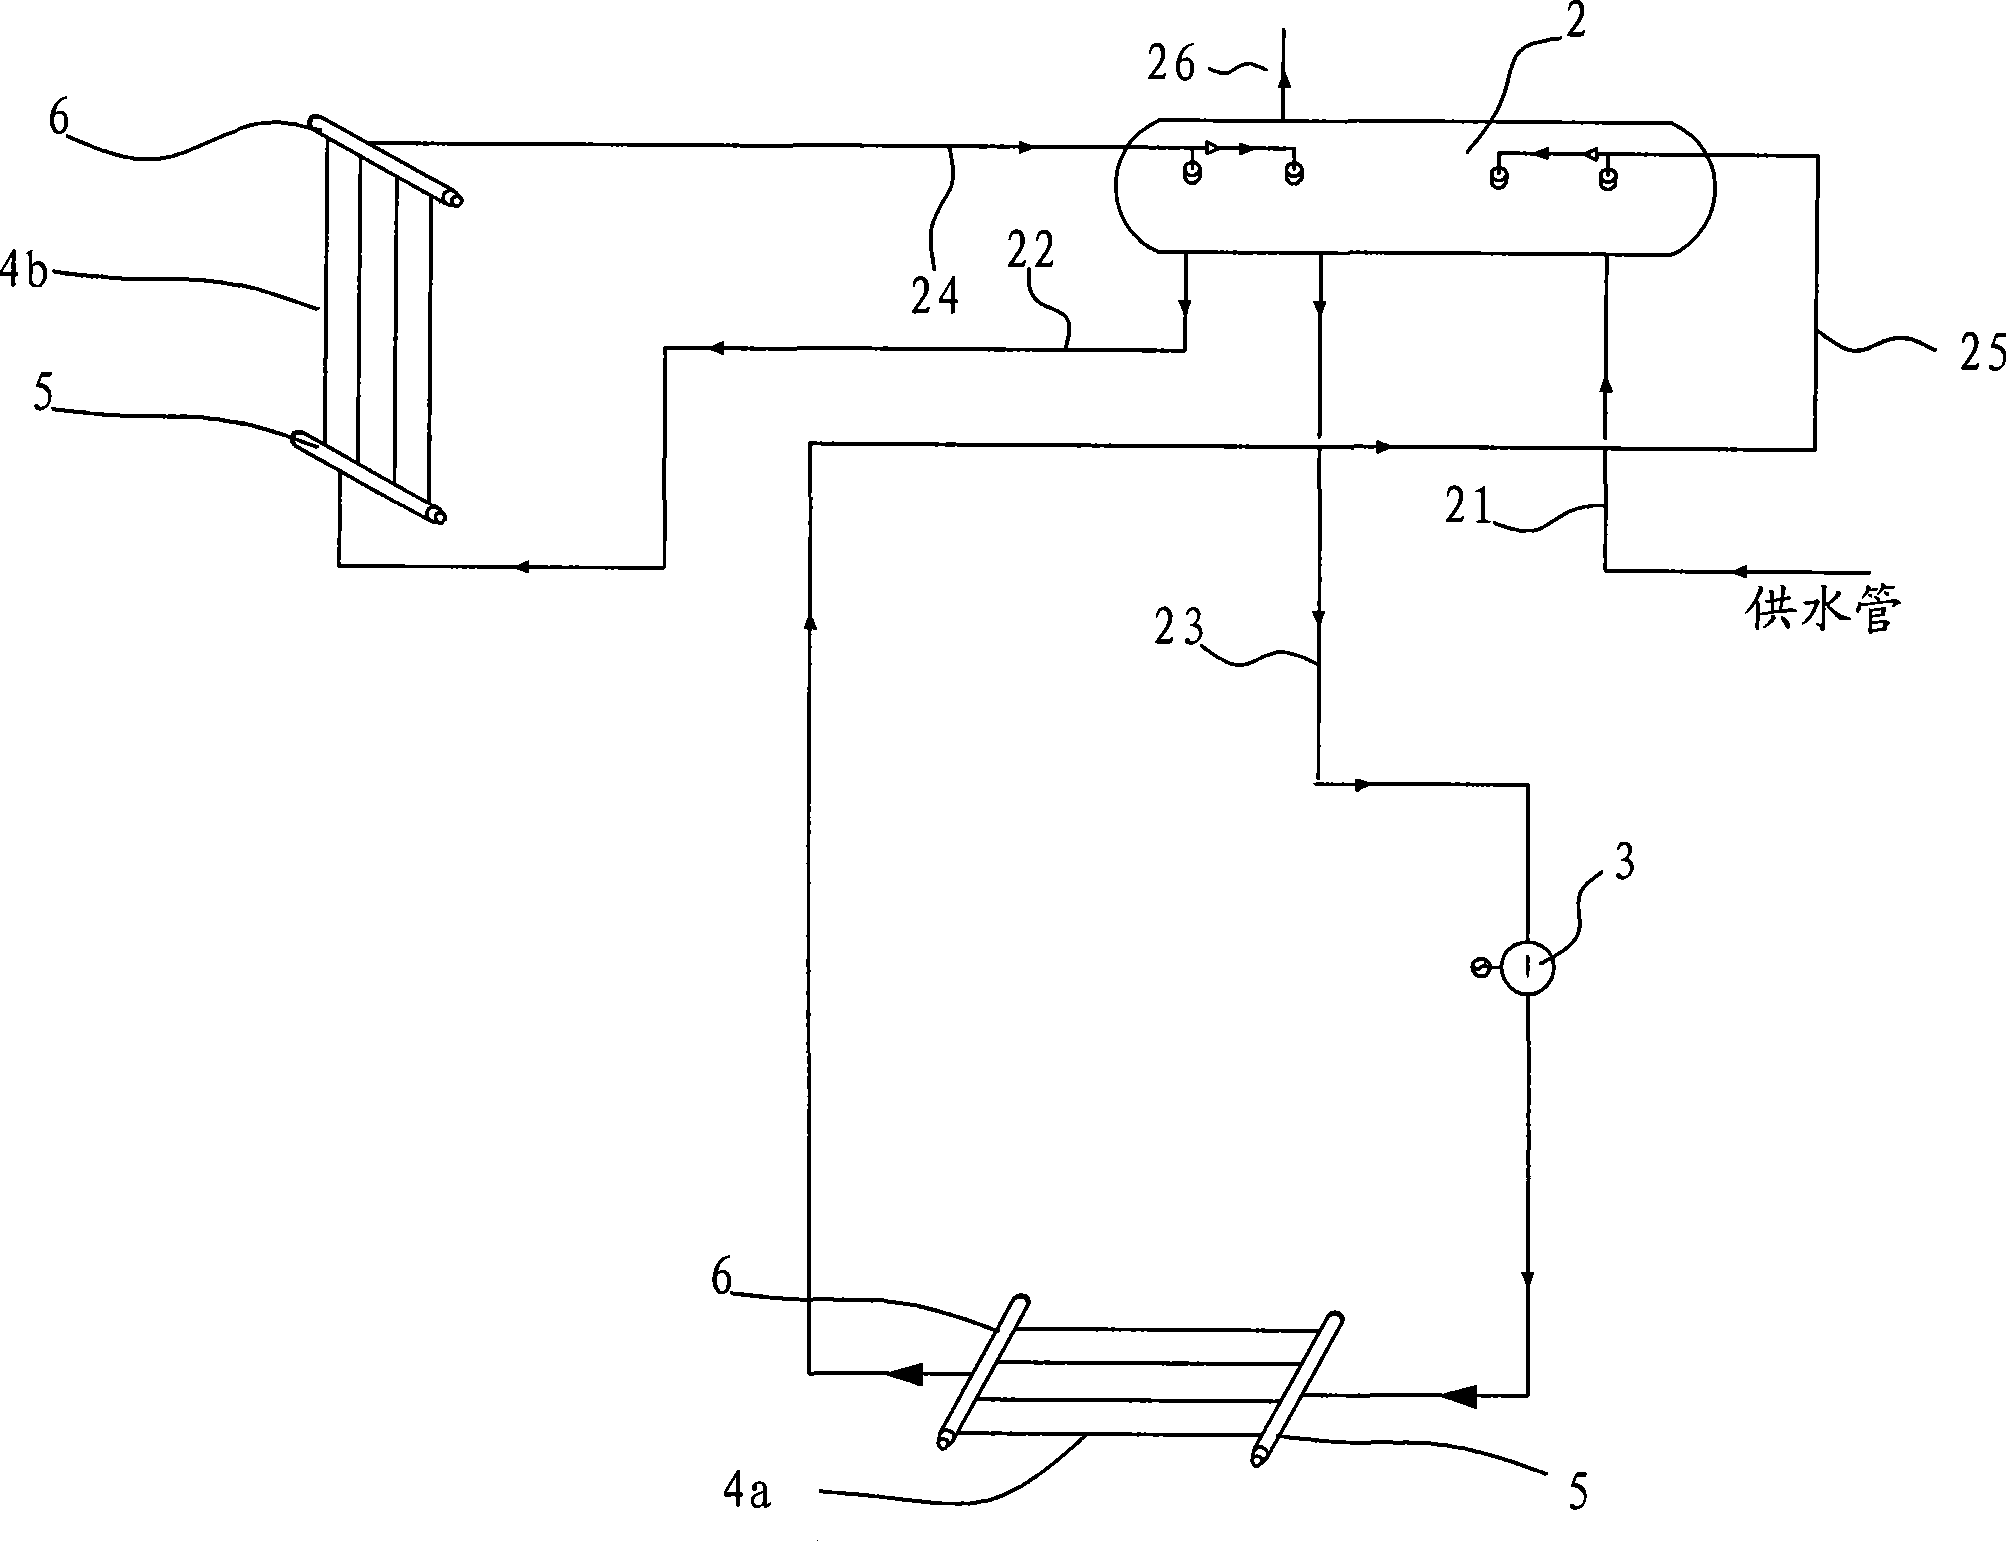 Circulating system of exhaust-heating boiler